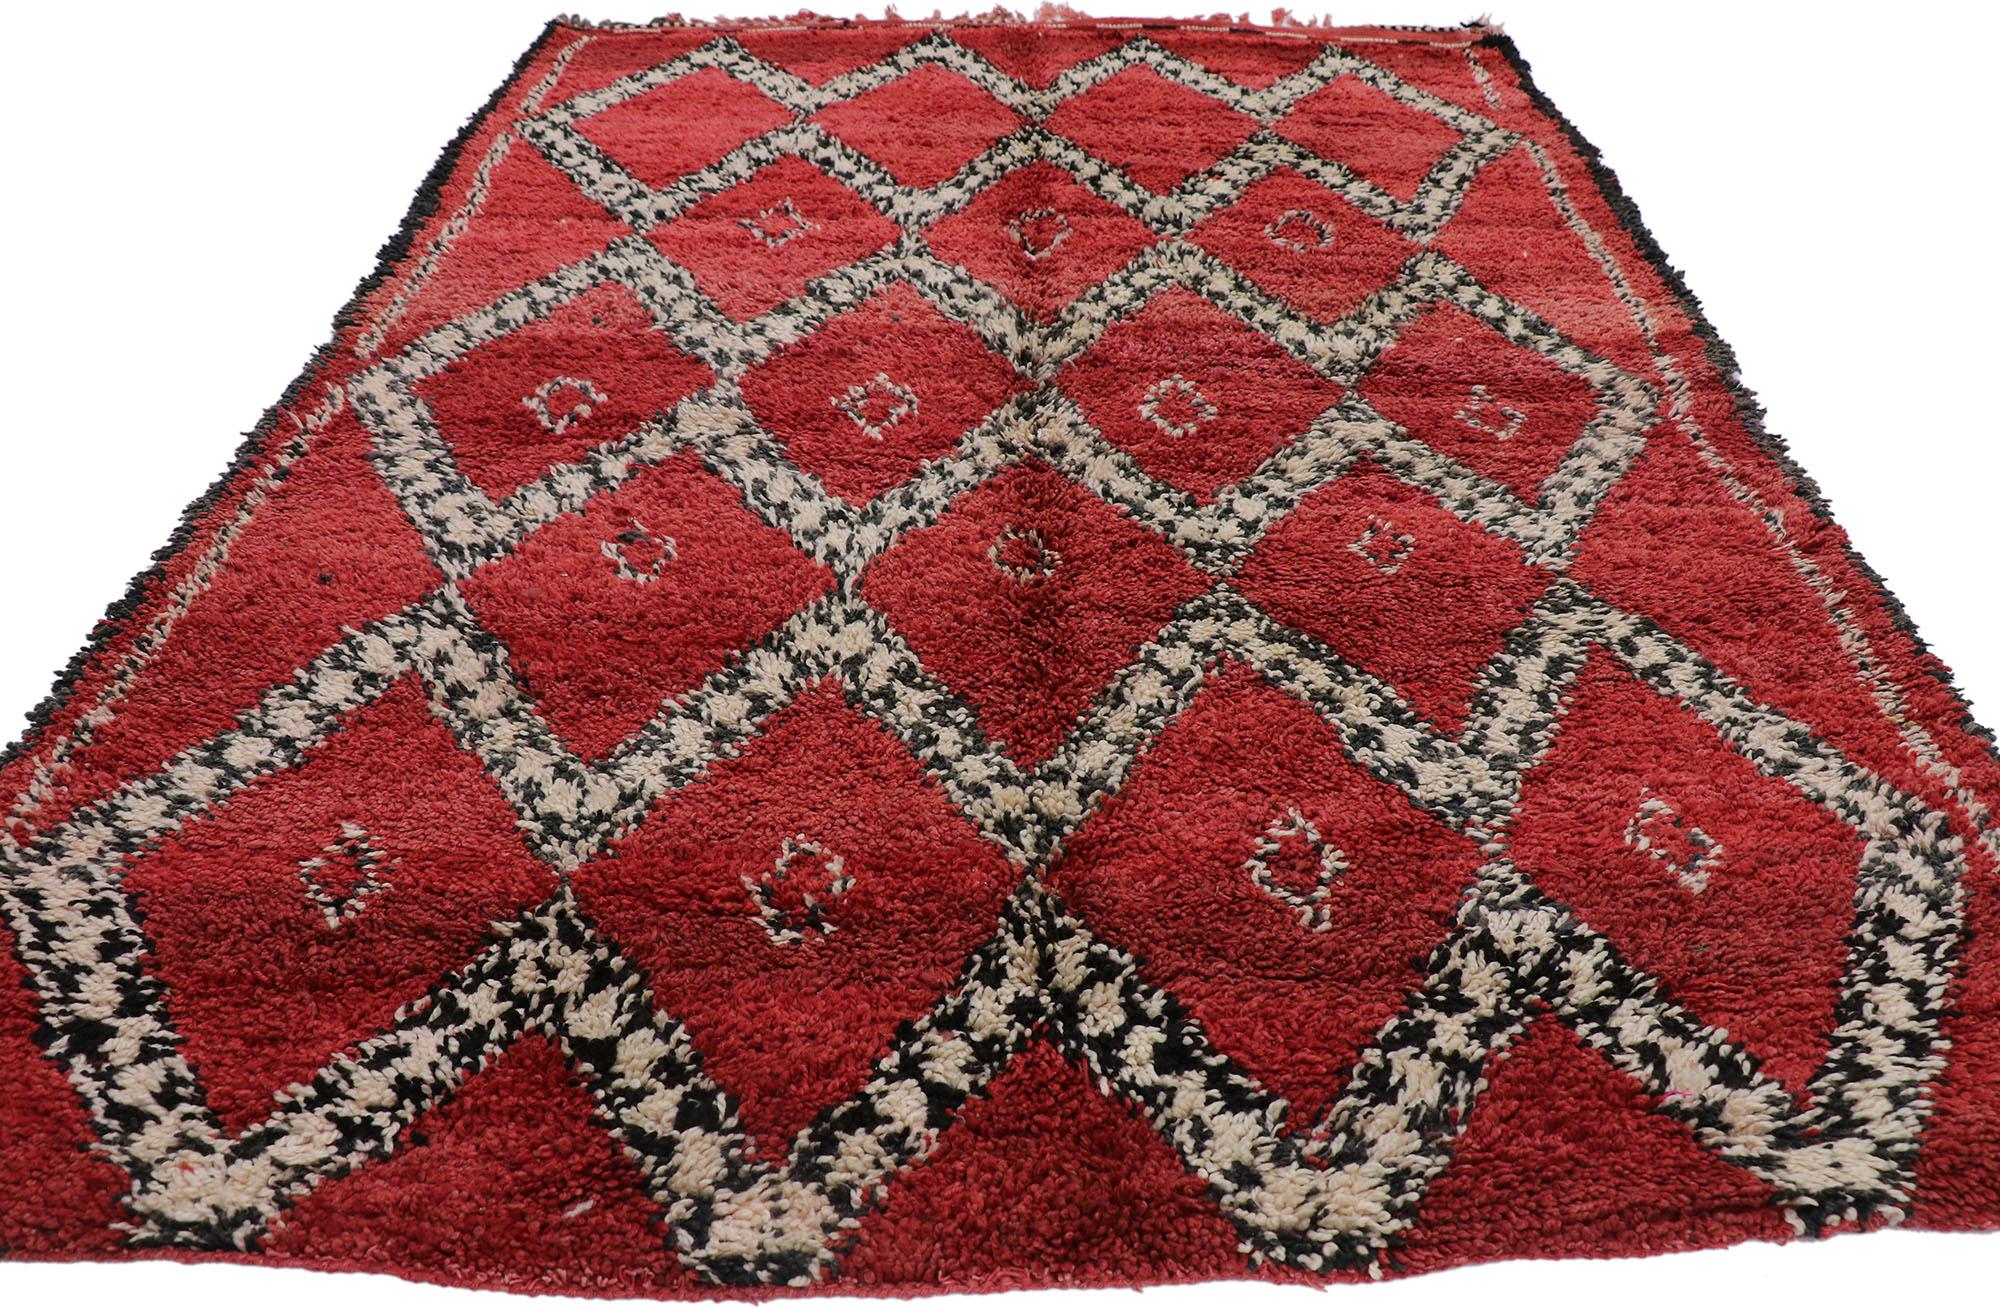 Bohemian Vintage Moroccan Beni Ourain Rug, Midcentury Meets Boho Chic For Sale